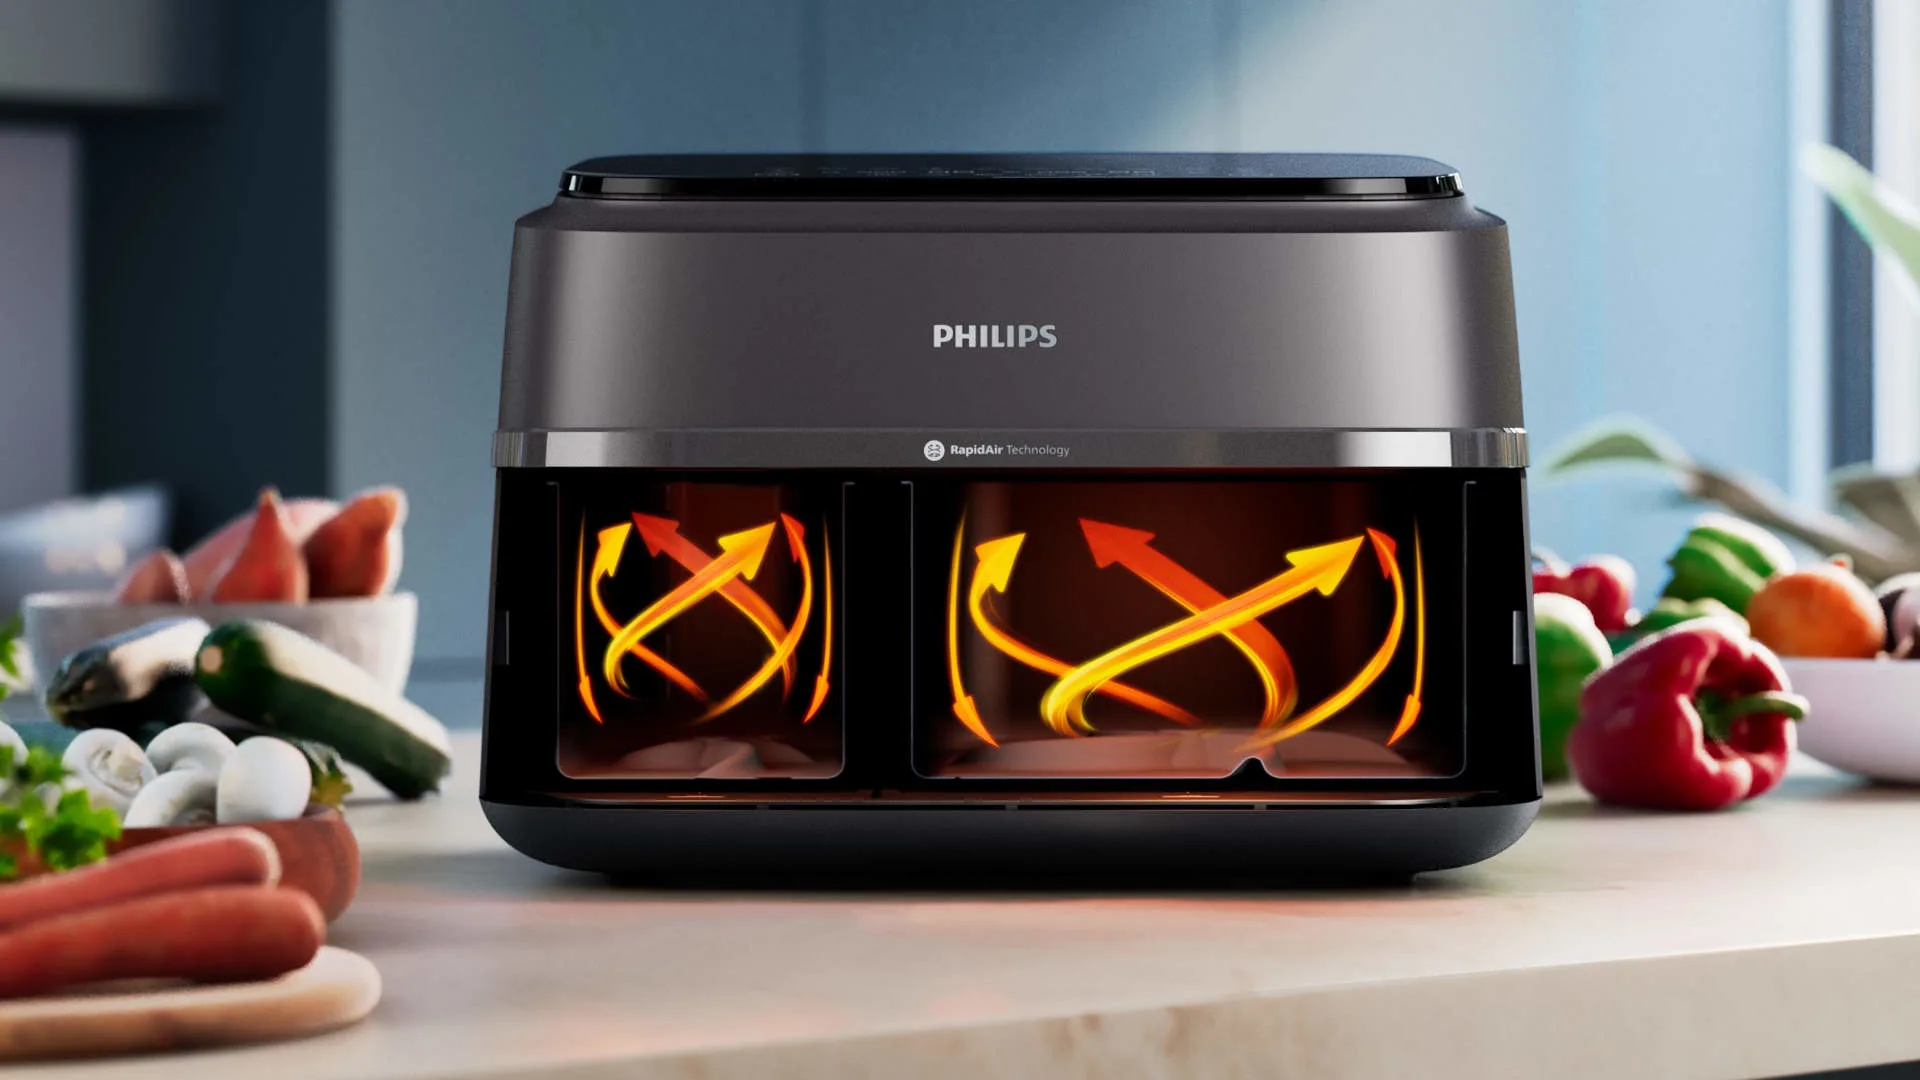 Philips Dual Basket 3000 Serie NA352/00 Airfryer